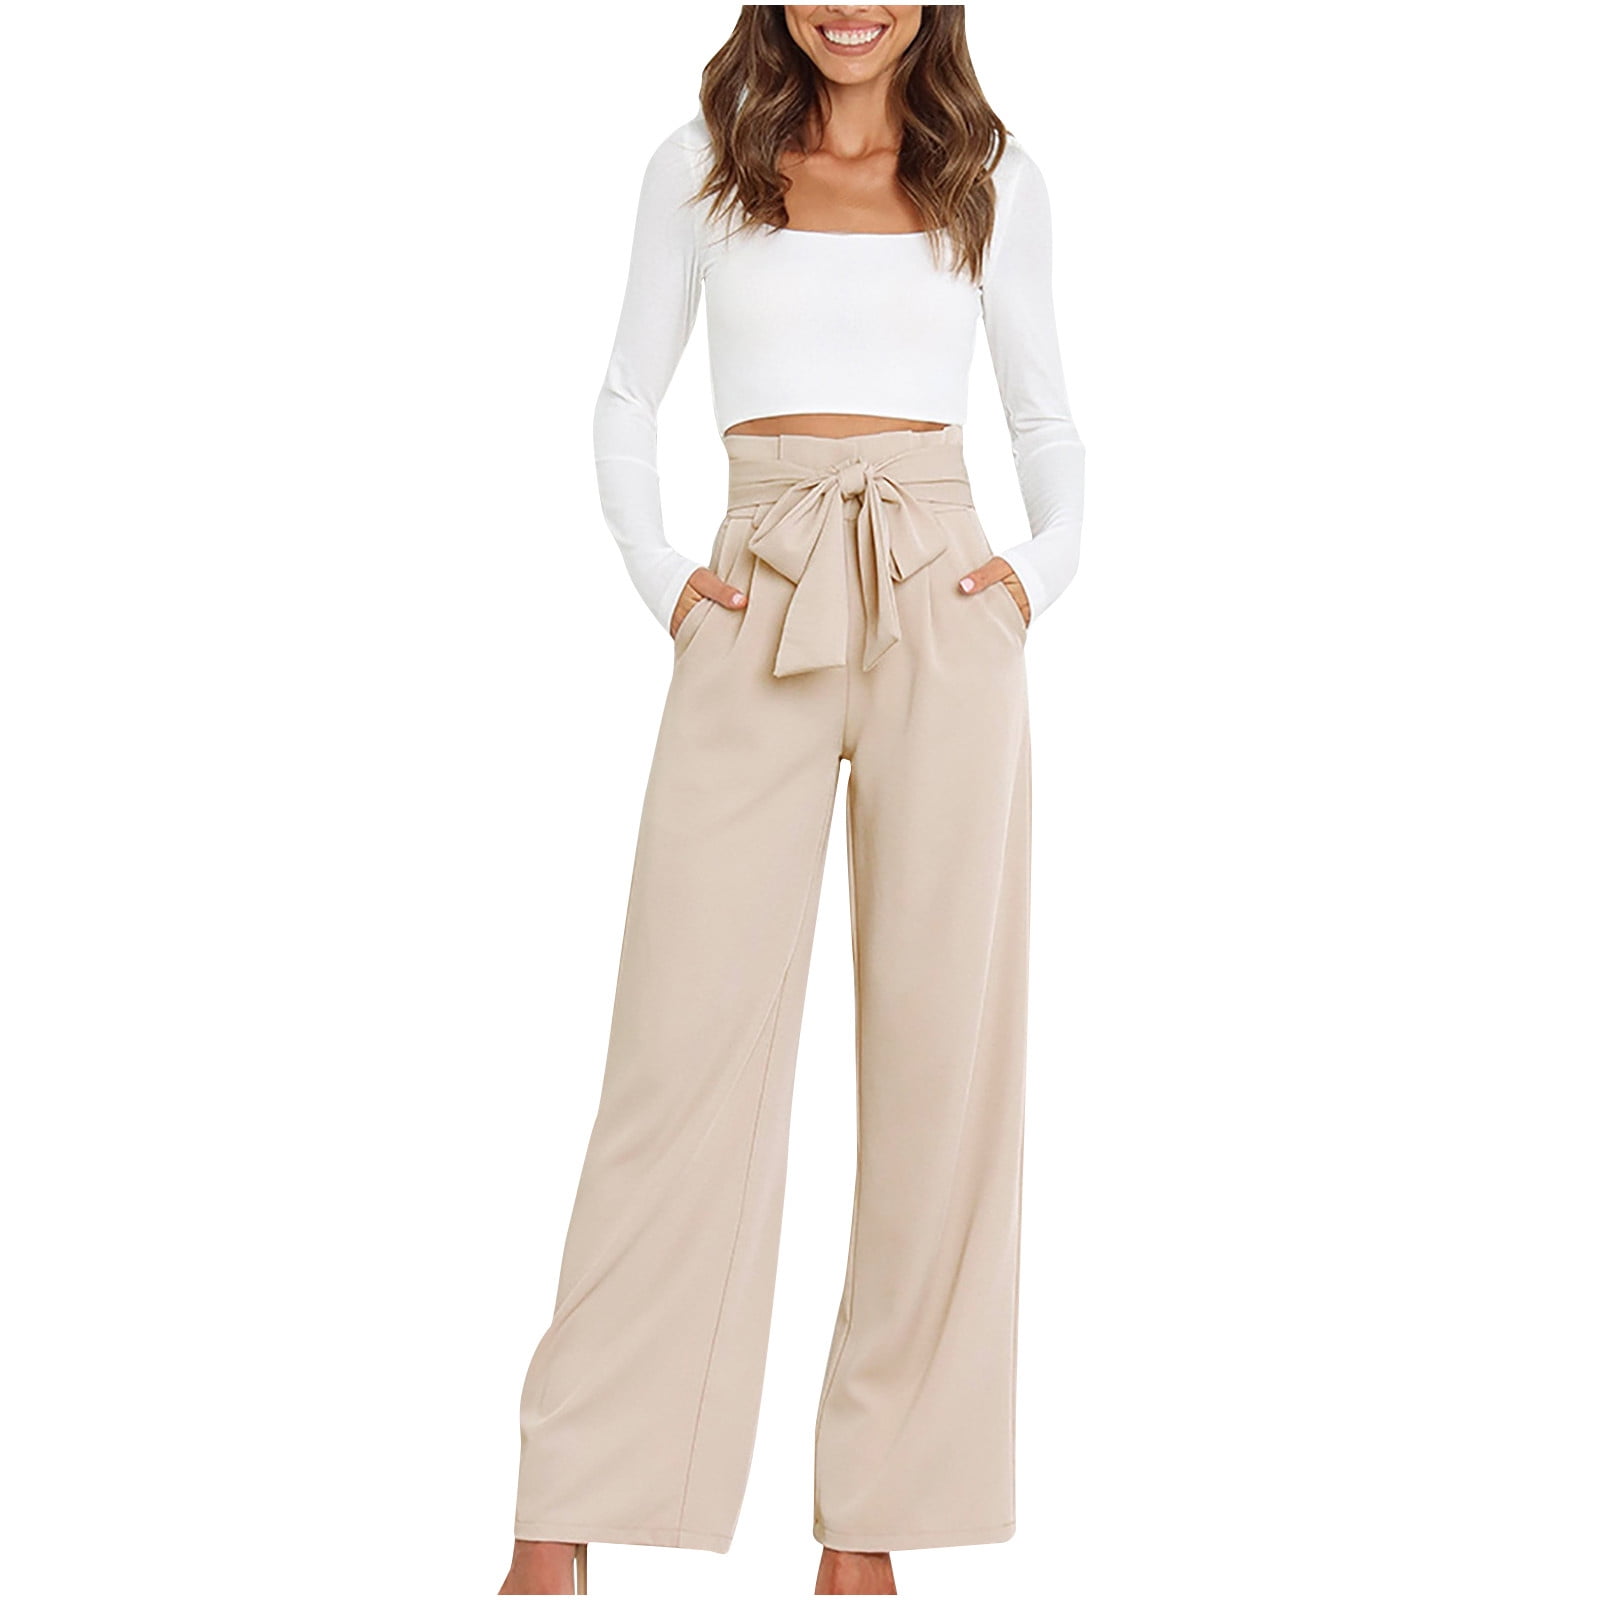 uSecee Wide Leg Pants for Women Elastic High Waisted Business Work Casual  Pants Loose Flowy Beach Palazzo Pants with Pockets Beige at  Women's  Clothing store